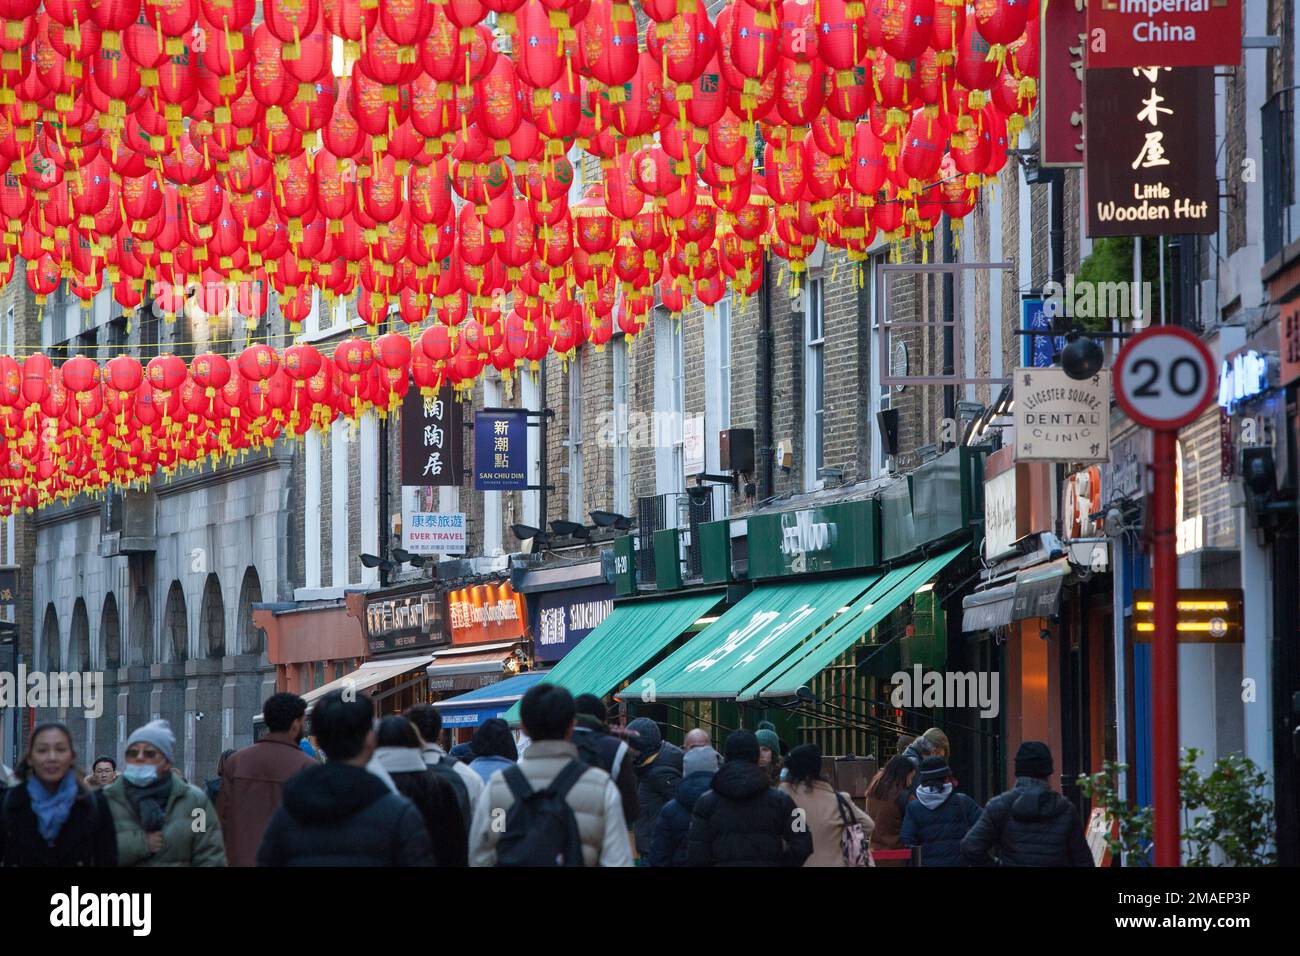 London, UK, 19 January 2023: In advance of Chinese New Year the streets of Chinatown are packed with locals and tourists. The Chinese Year of the Rabbit begins on Sunday 22nd January. Anna Watson/Alamy Live News Stock Photo